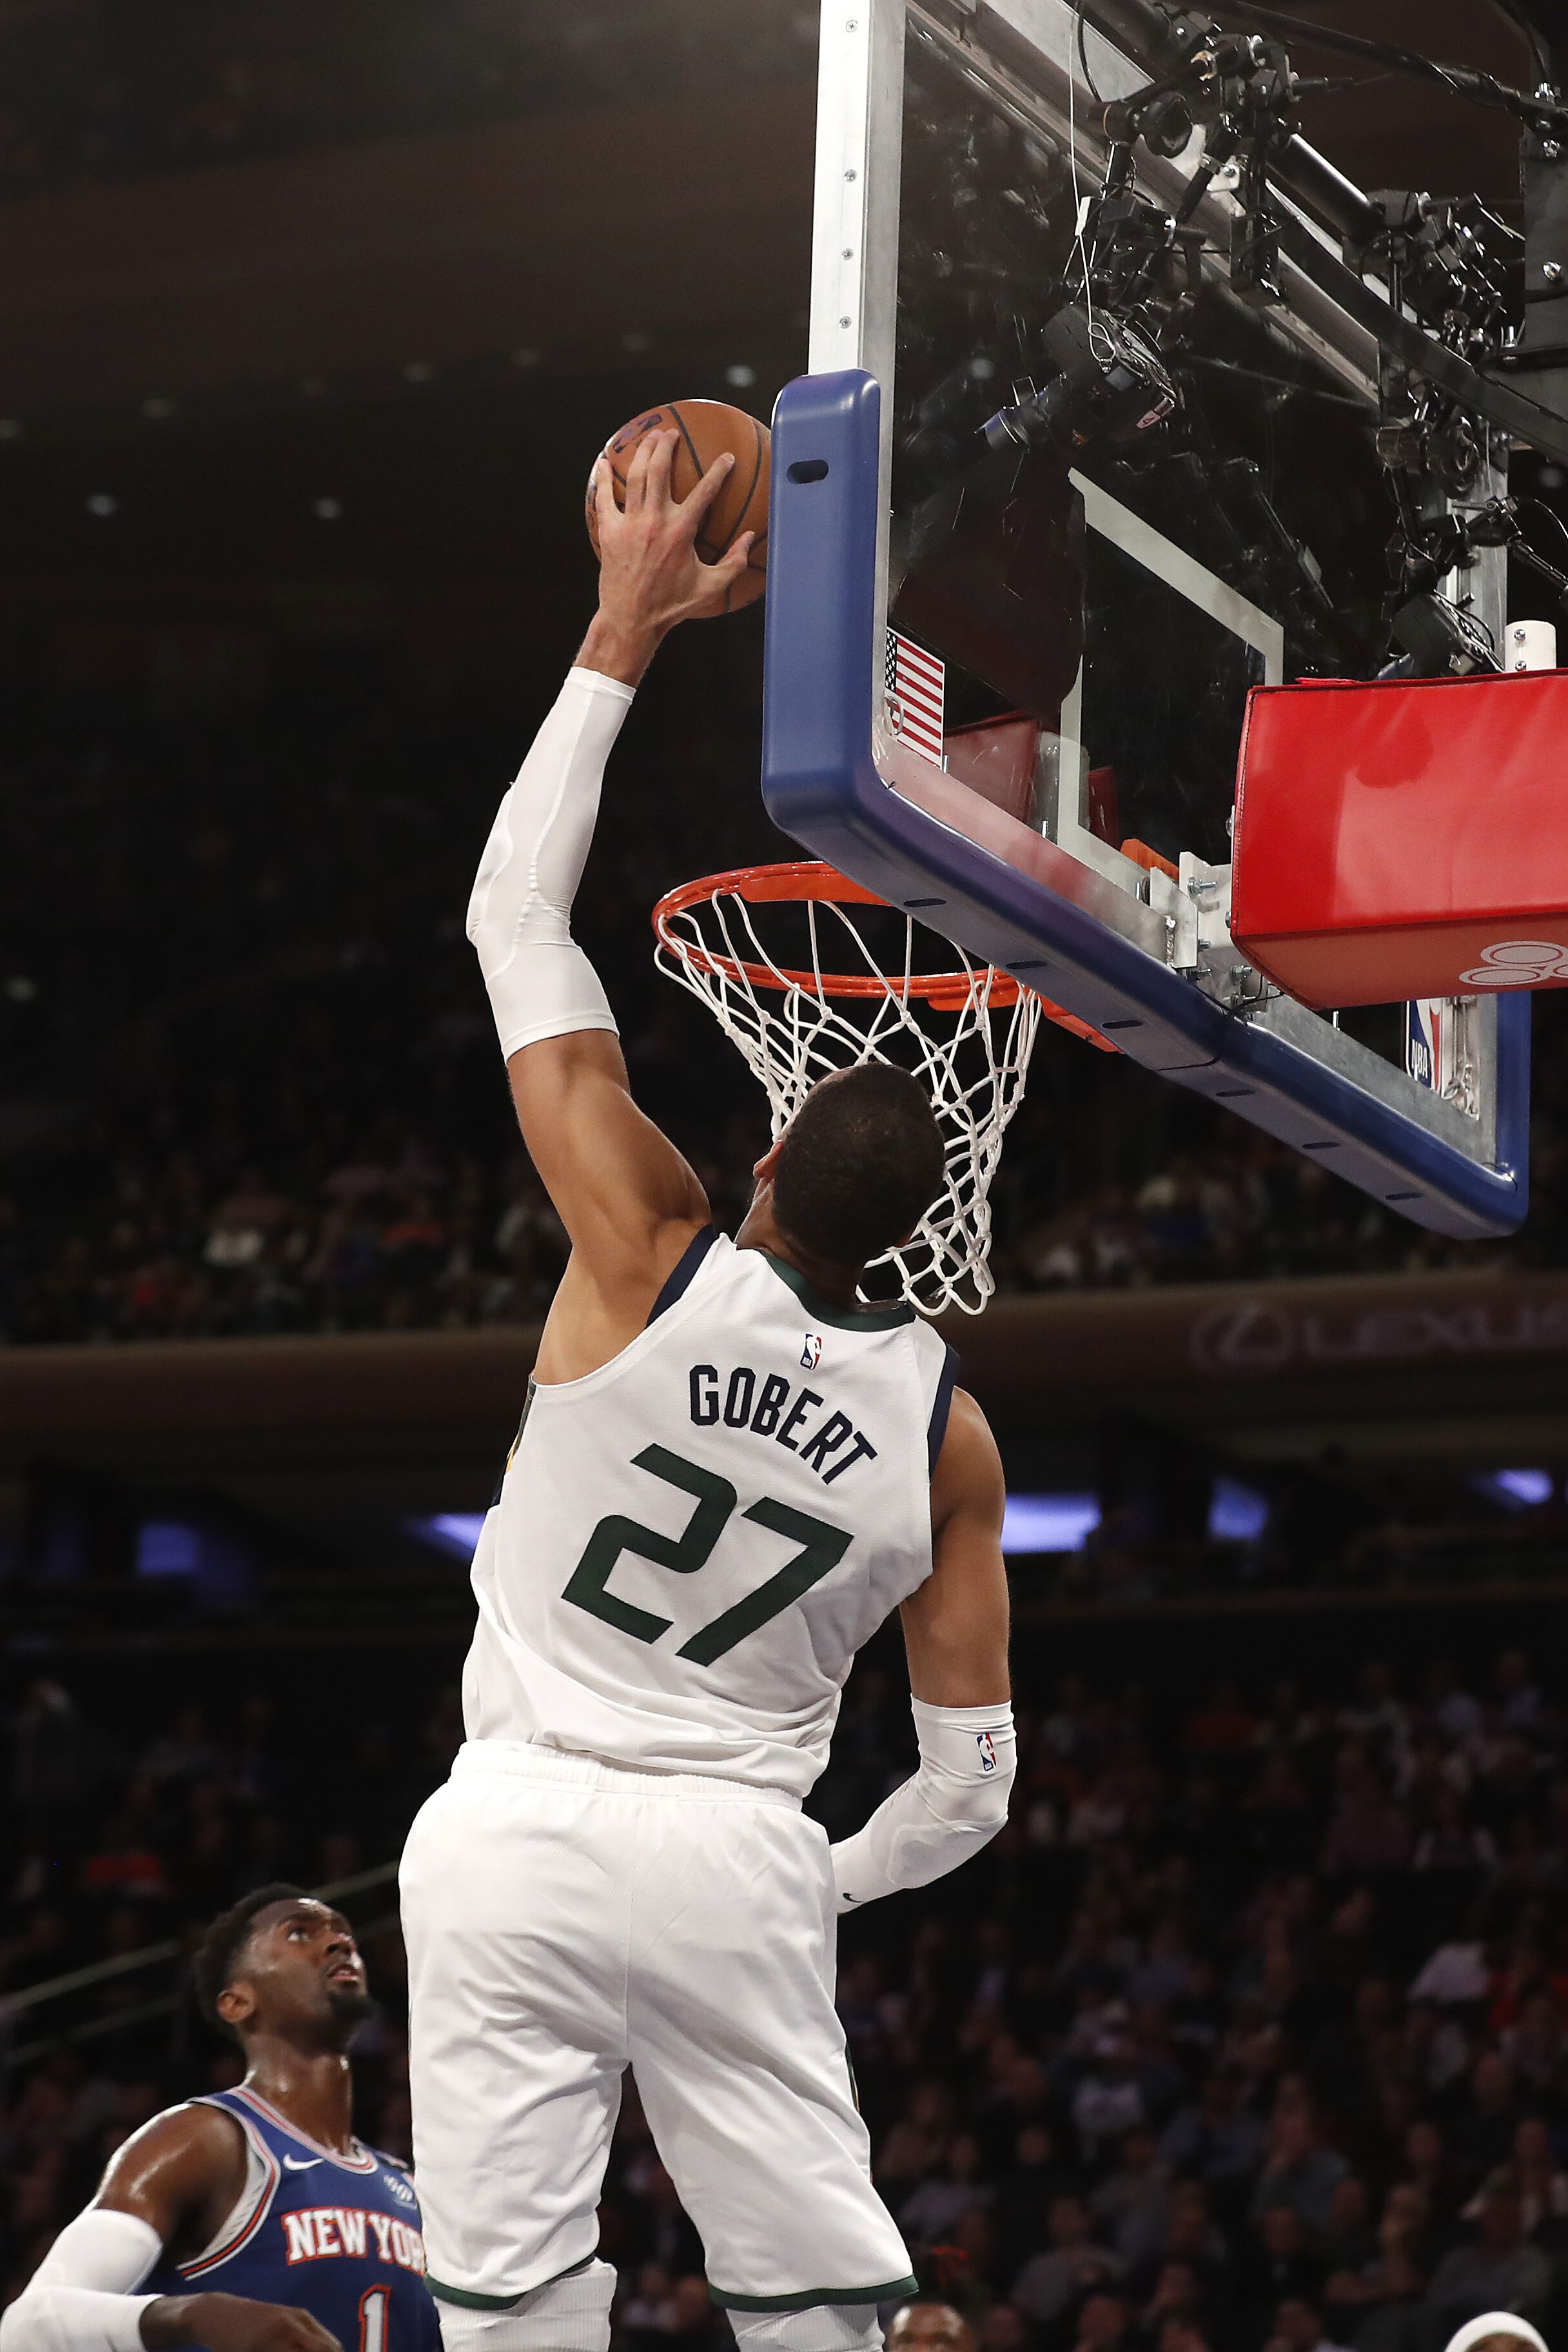 Rudy Gobert attempts a slam dunk during a game against the New York Knicks at Madison Square Garden on March 04, 2020 in New York City. | Source: Getty Images